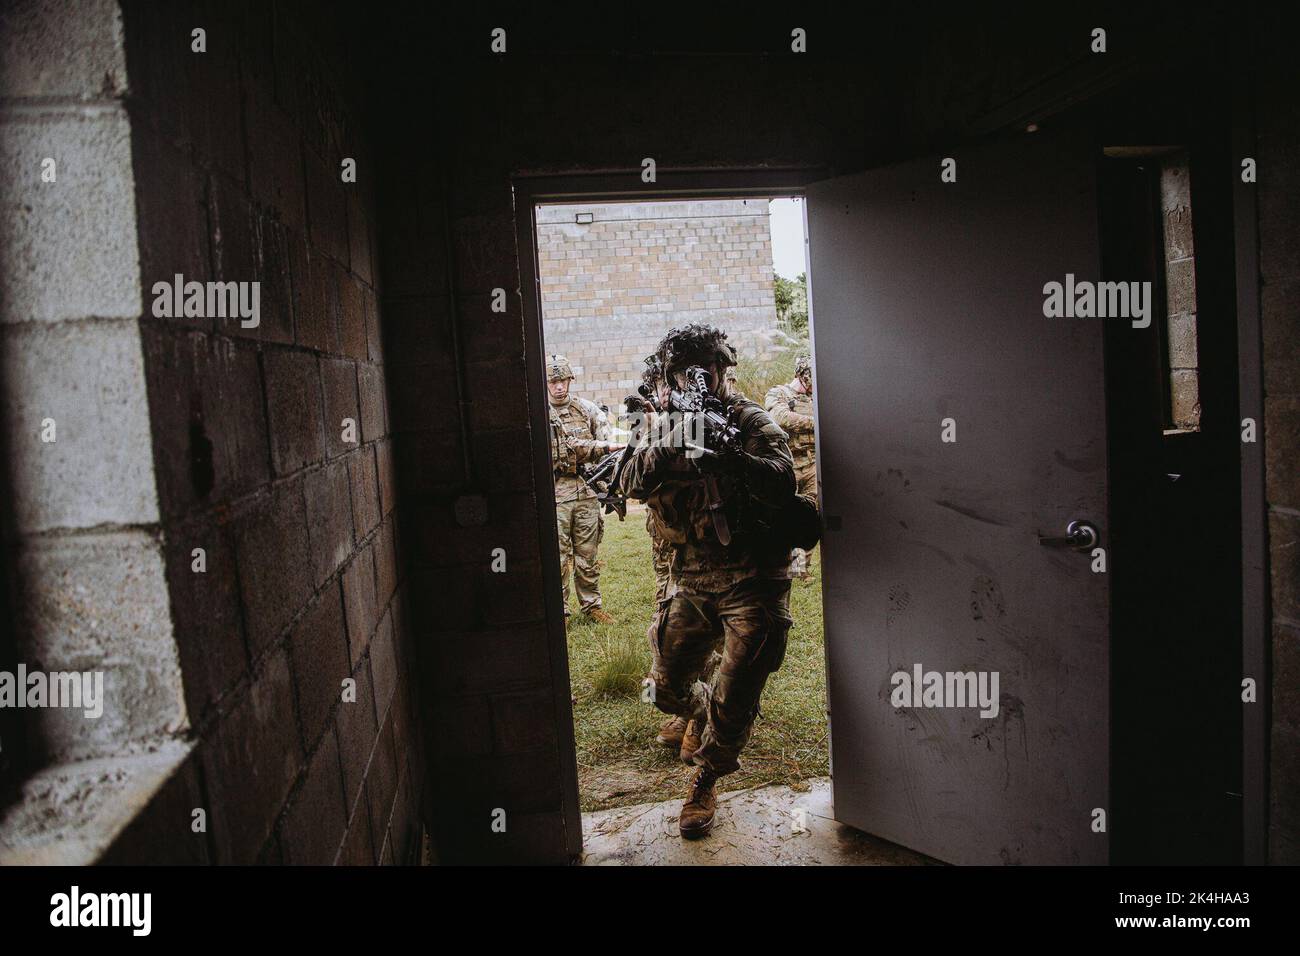 A U.S. Army Soldier assigned to Alpha Company, 2nd Battalion, 27th Infantry Regiment, 3rd Infantry Brigade Combat Team, 25th Infantry Division out of Schofield Barracks, Hawaii, enters though an open door at an urban terrain training site on Andersen Air Force Base, Guam, Sept. 25, 2022. Alpha Company deployed to Guam to rehearse their mission as the Ready Response Force and practiced military operations in urban training after arriving. Stock Photo